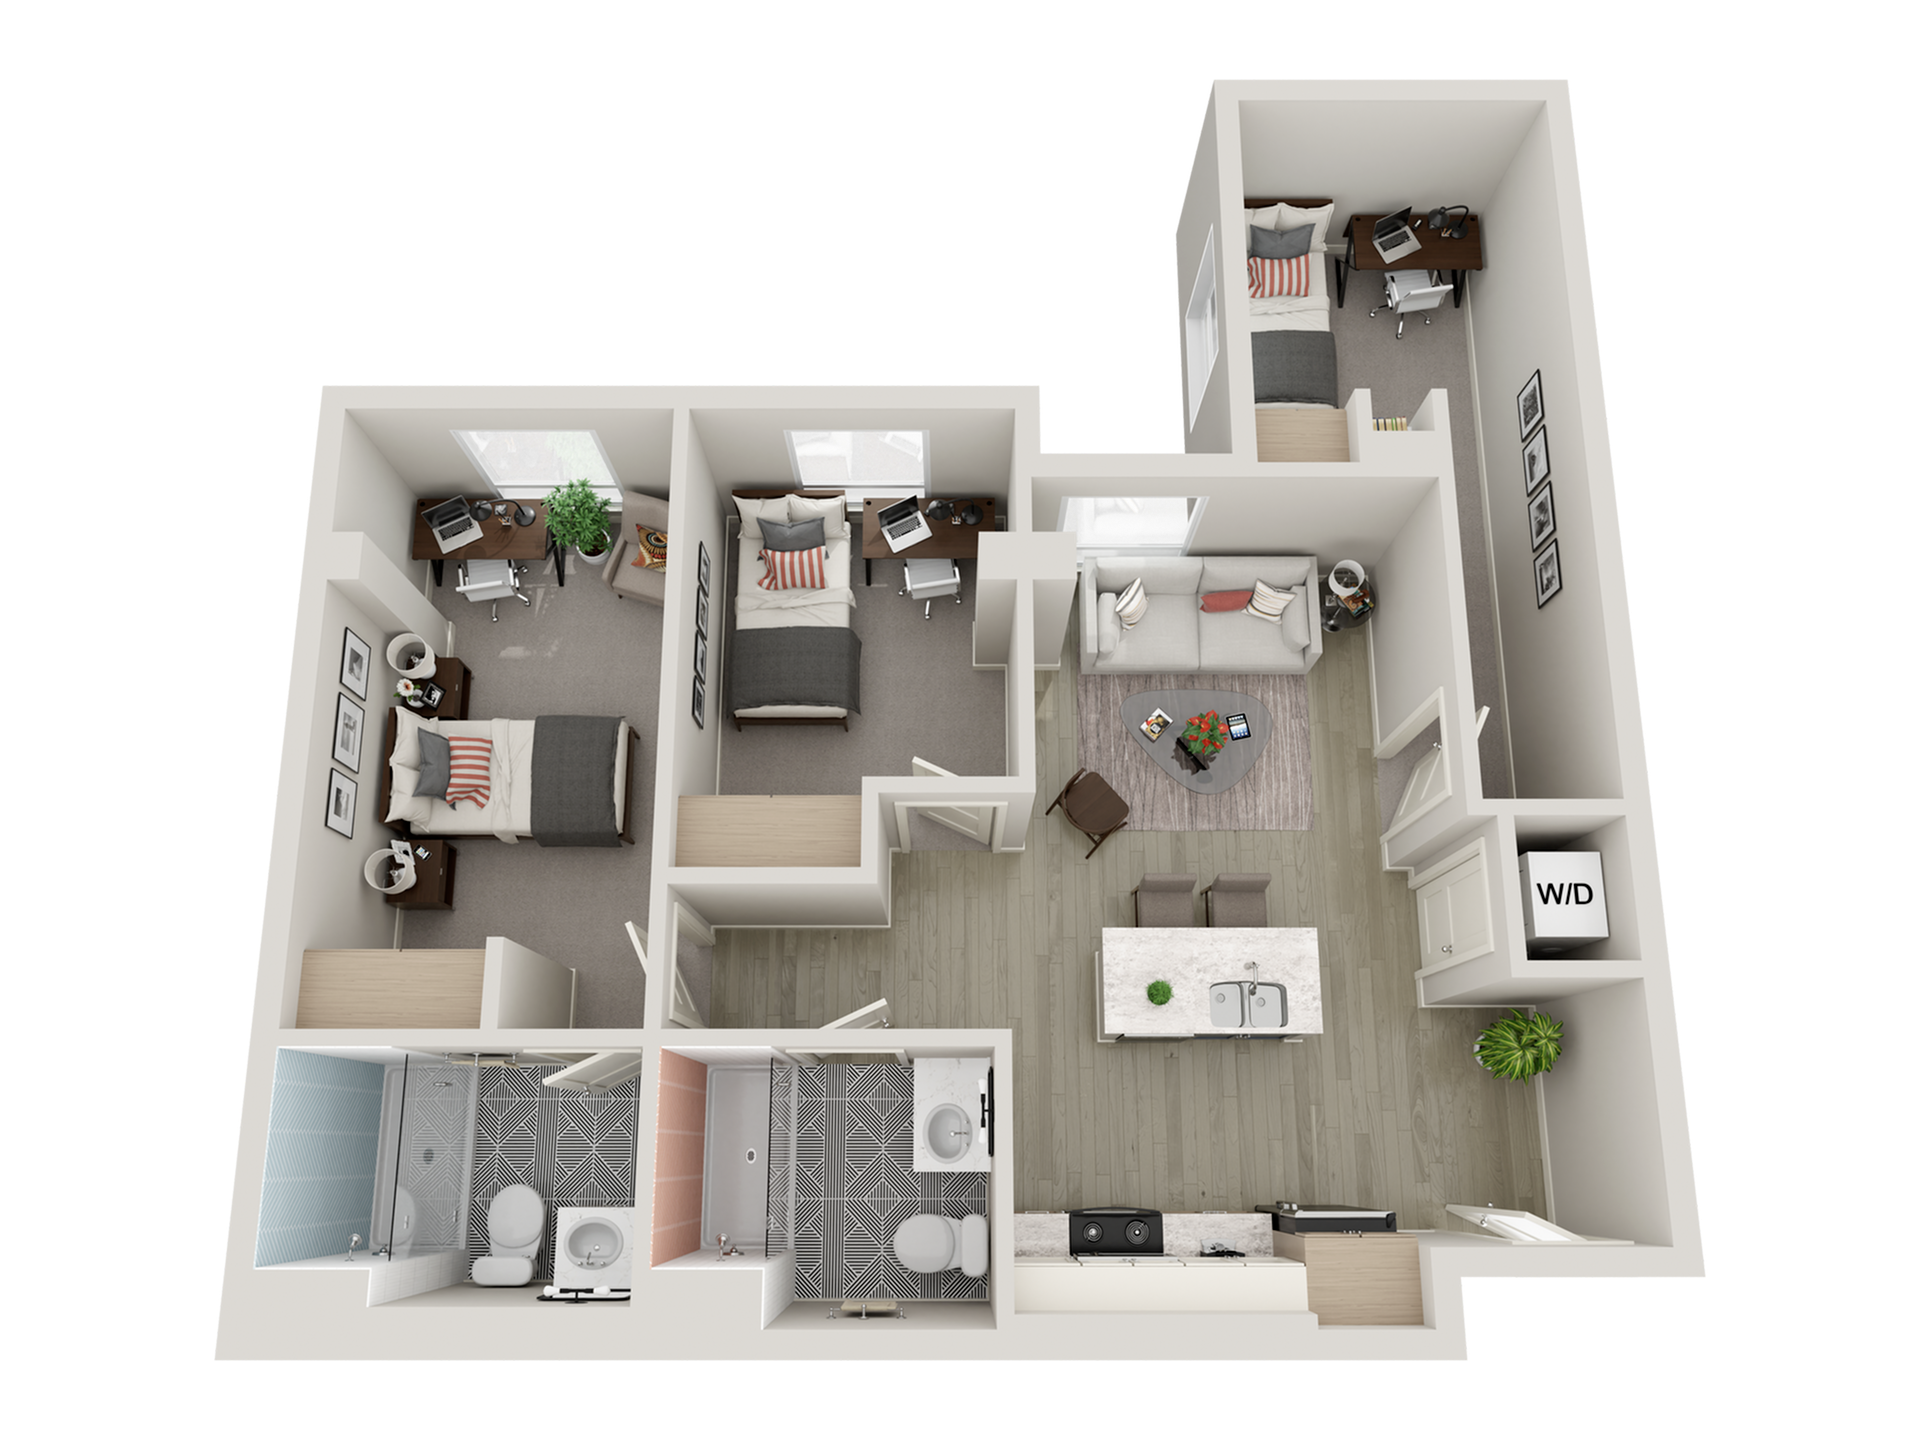 3-bedroom floorplan with beds, desks, closets, kitchen and island, 2 bathrooms, and washer dryer.